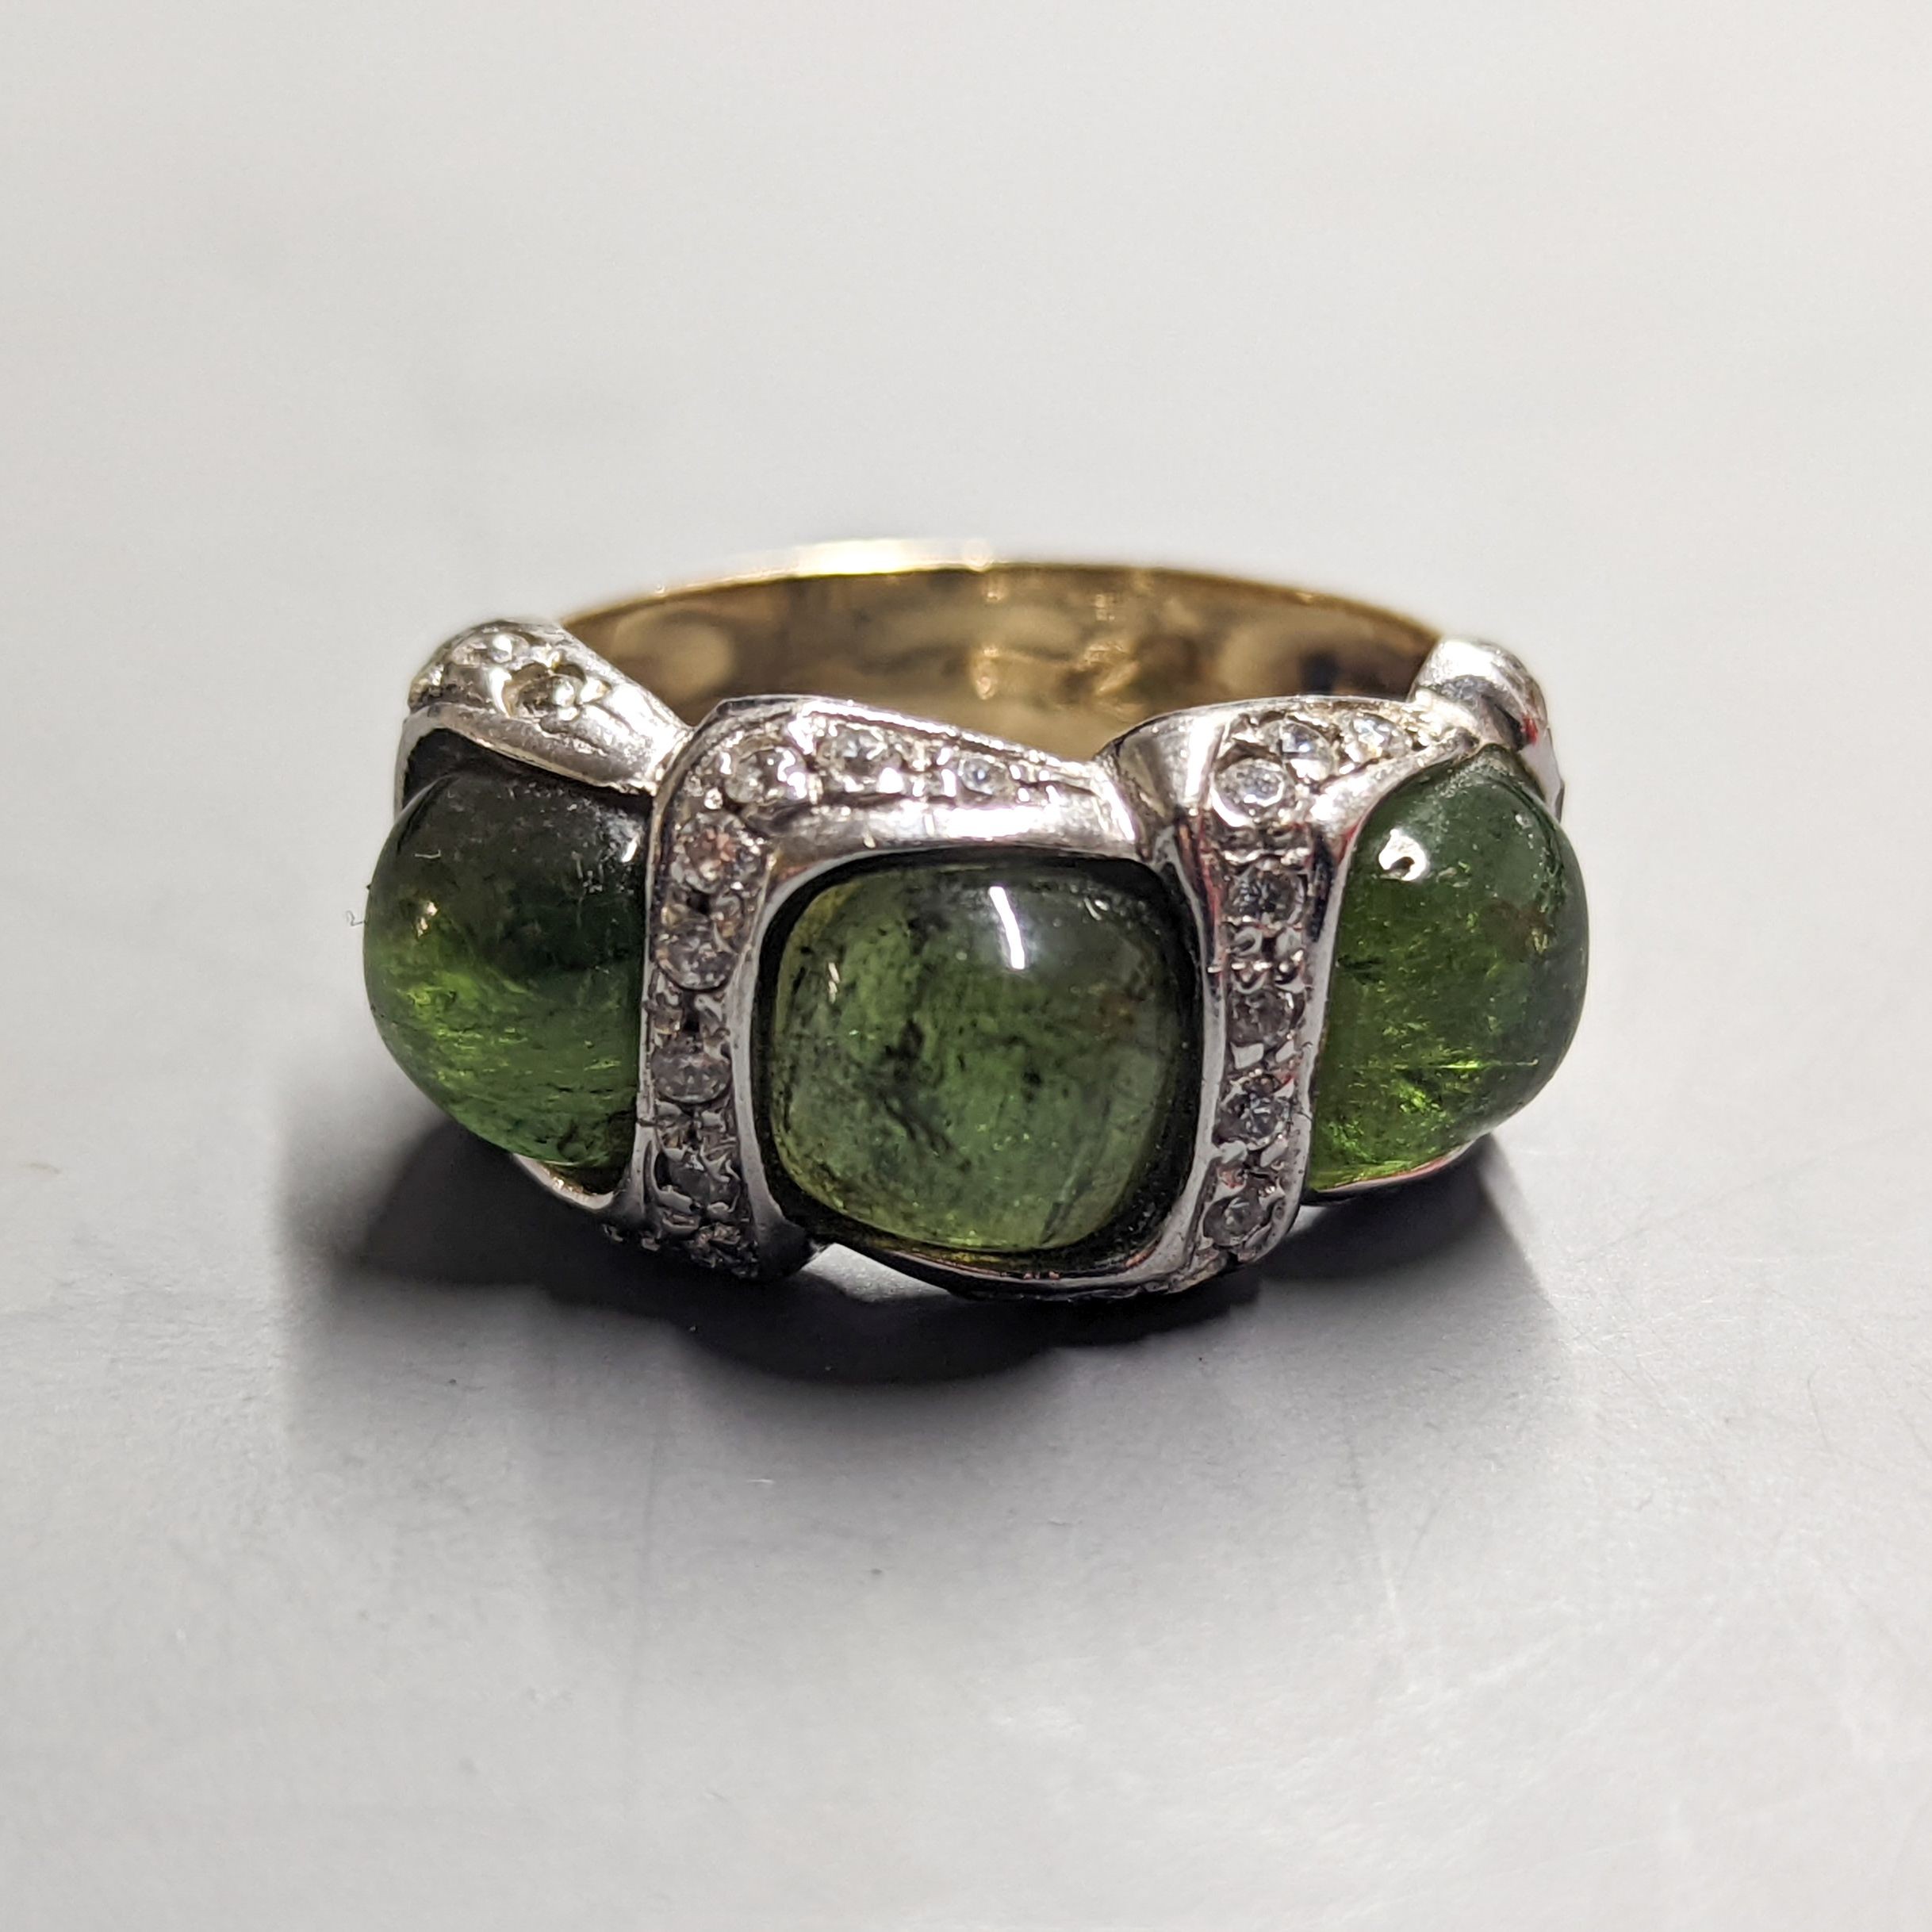 A modern 585 yellow metal, three stone green cabochon and diamond chip set dress ring, size N/O, gross weight 8.3 grams.